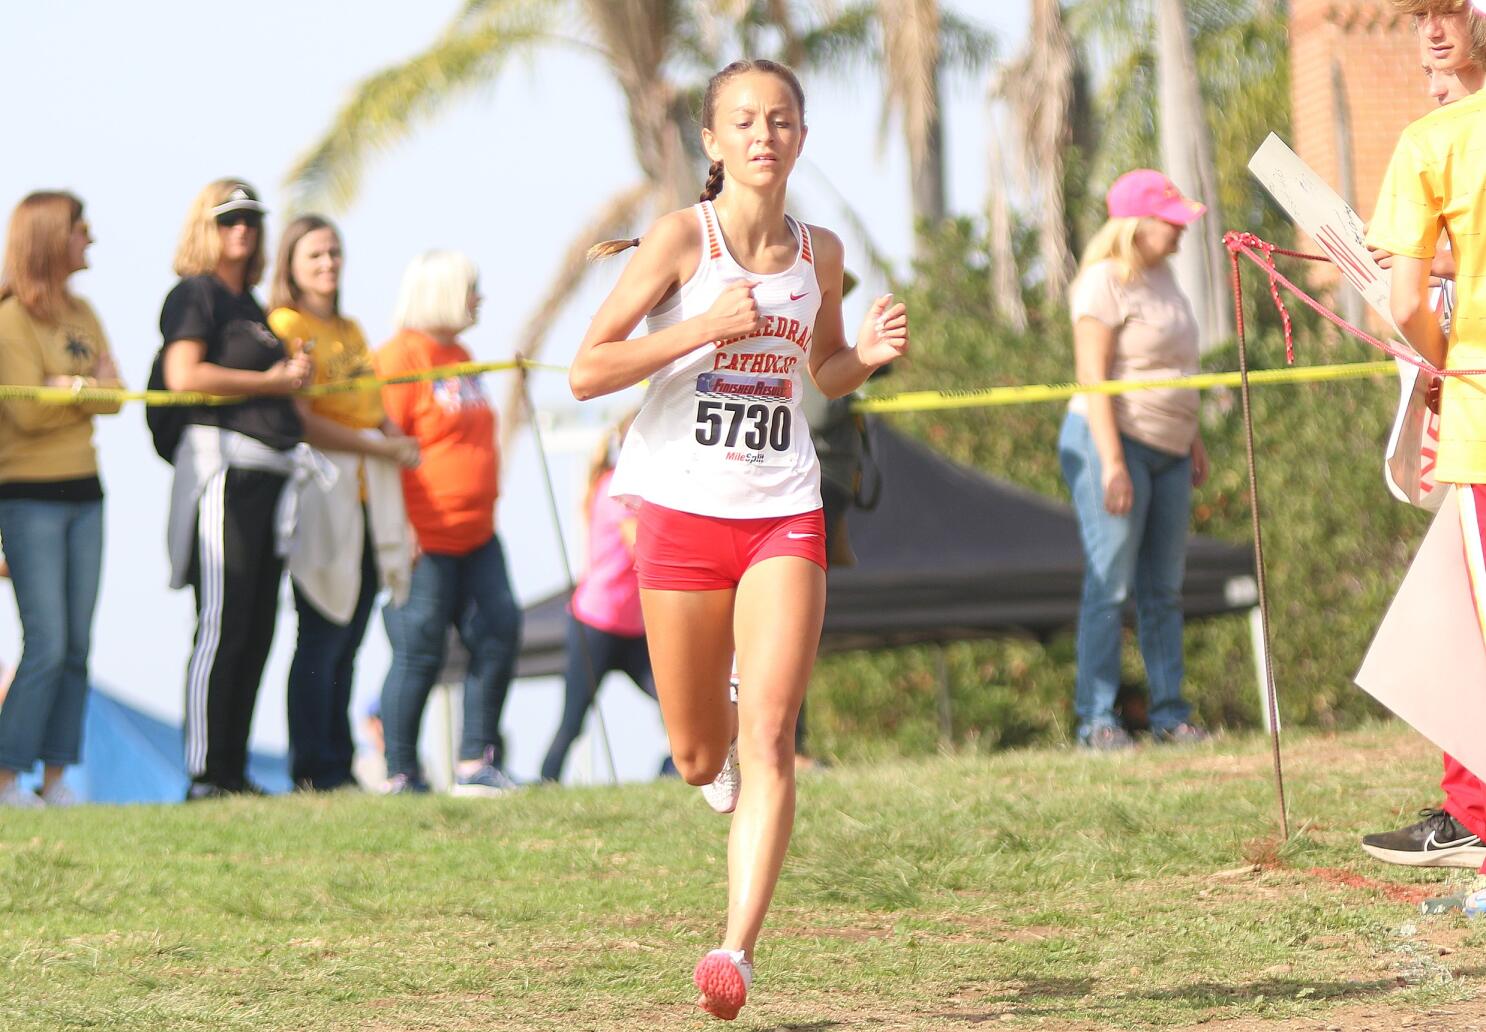 Aiming to go distance, Cathedral Catholic girls running strong - The San  Diego Union-Tribune